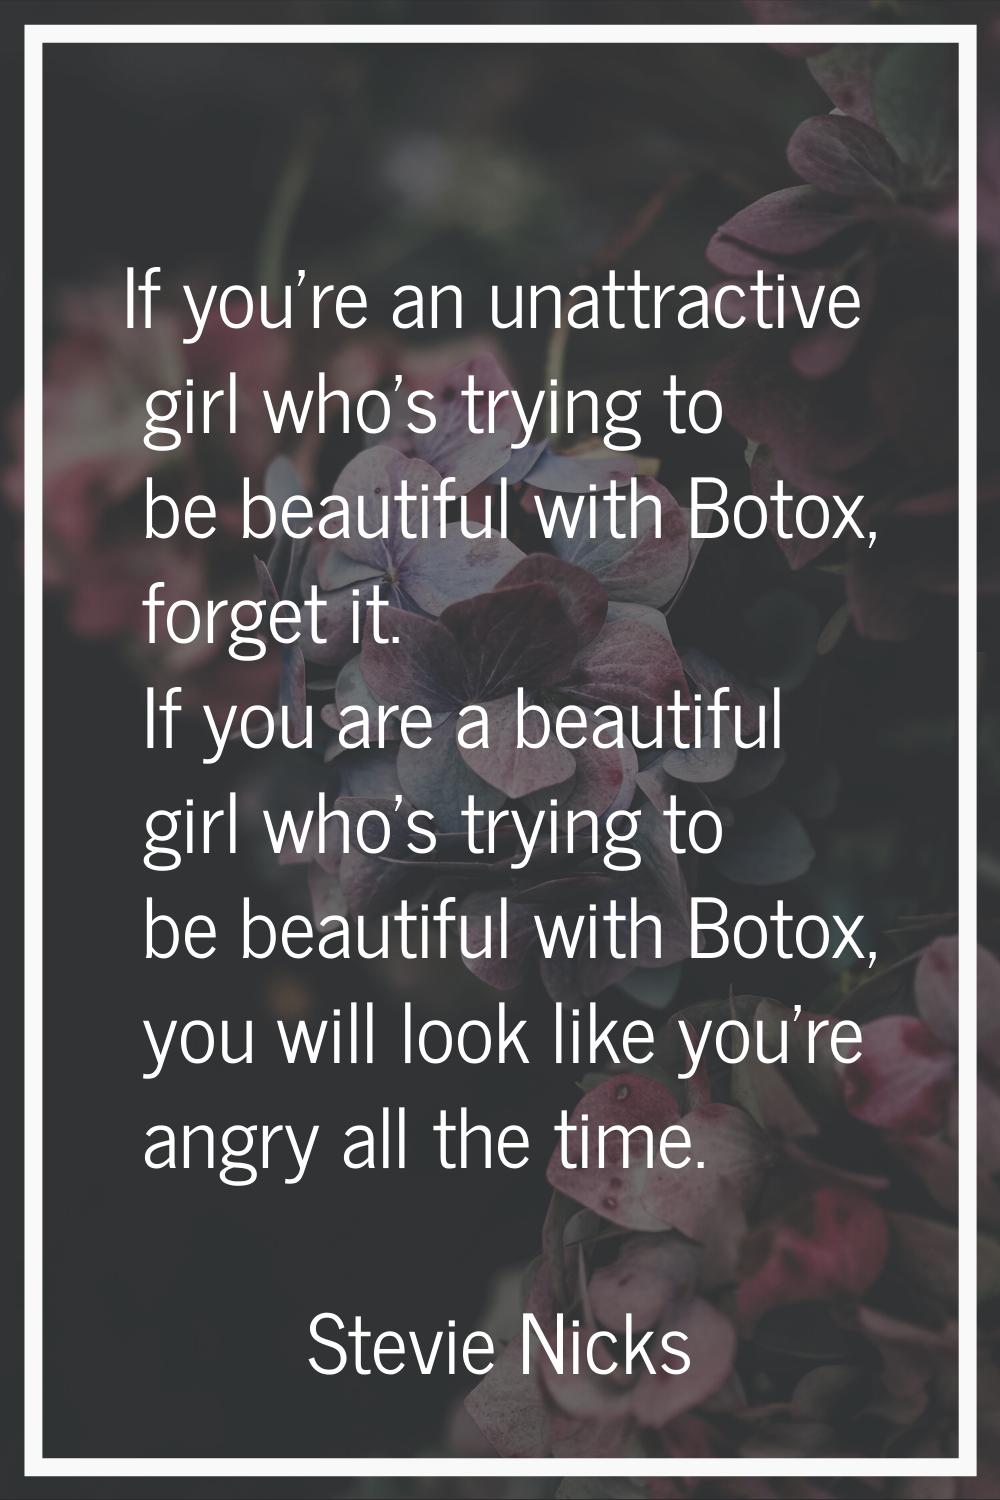 If you're an unattractive girl who's trying to be beautiful with Botox, forget it. If you are a bea